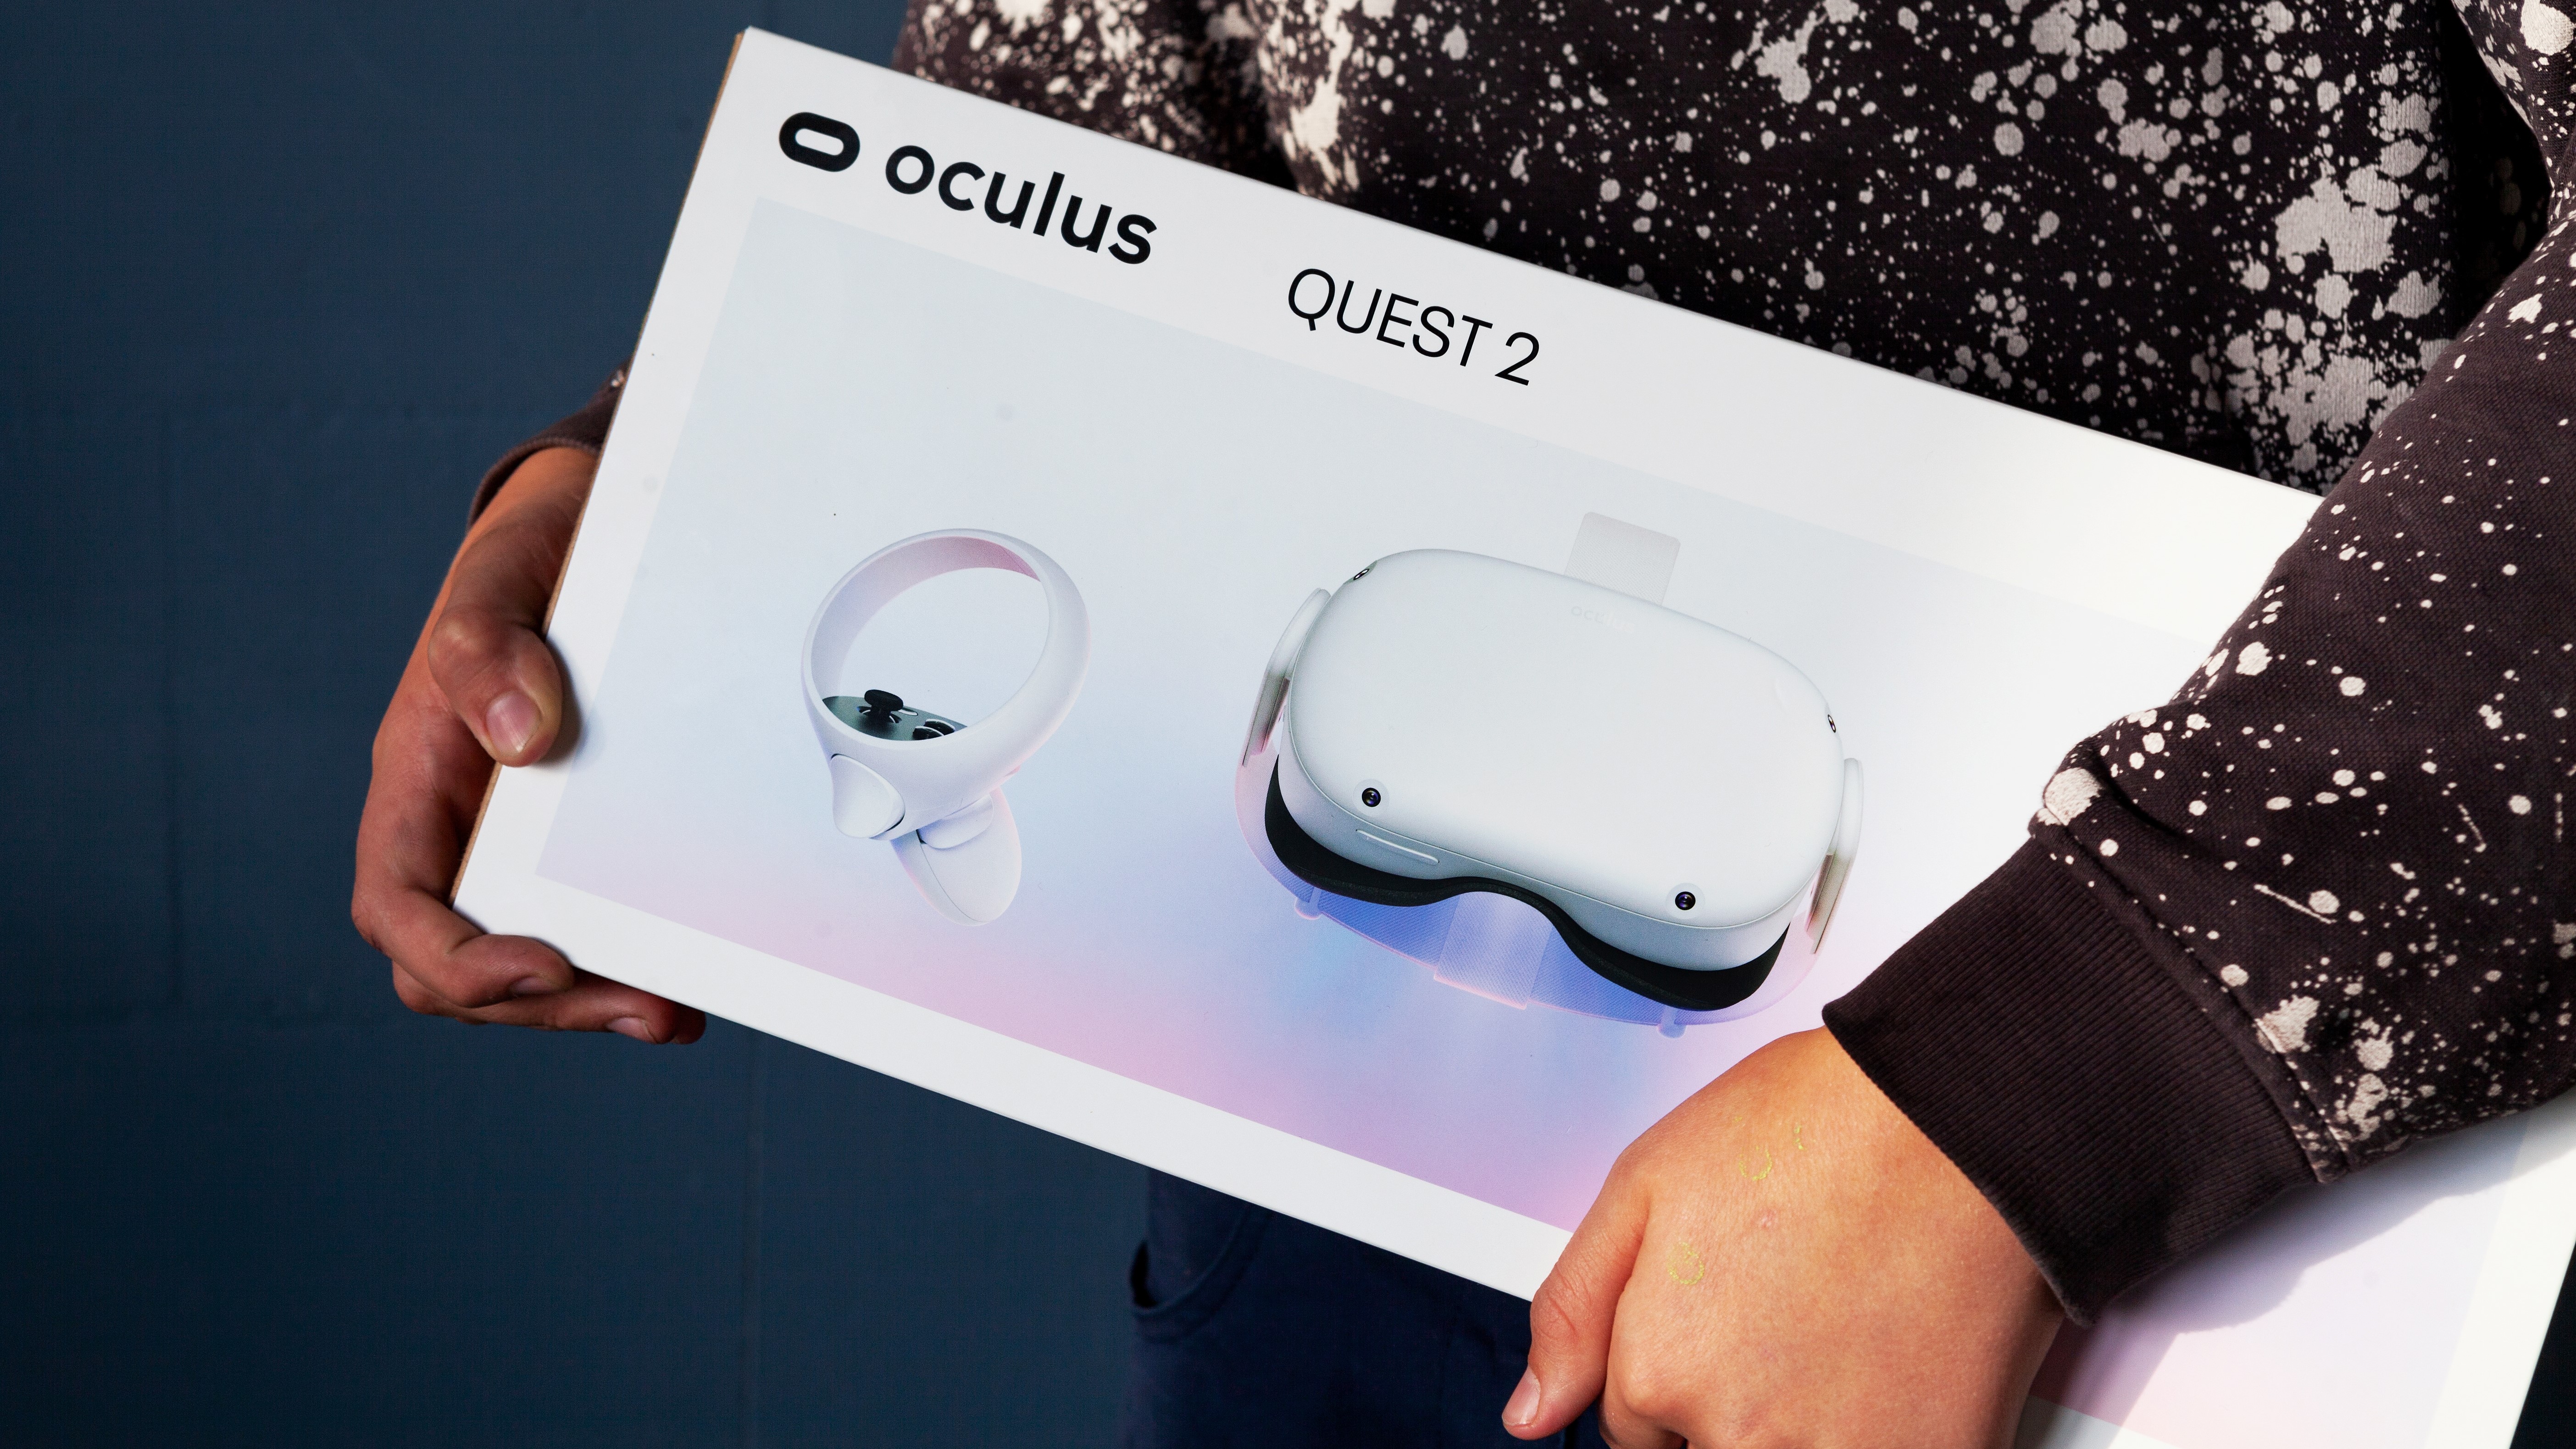 A person carries a box with an Oculus Quest 2 VR headset